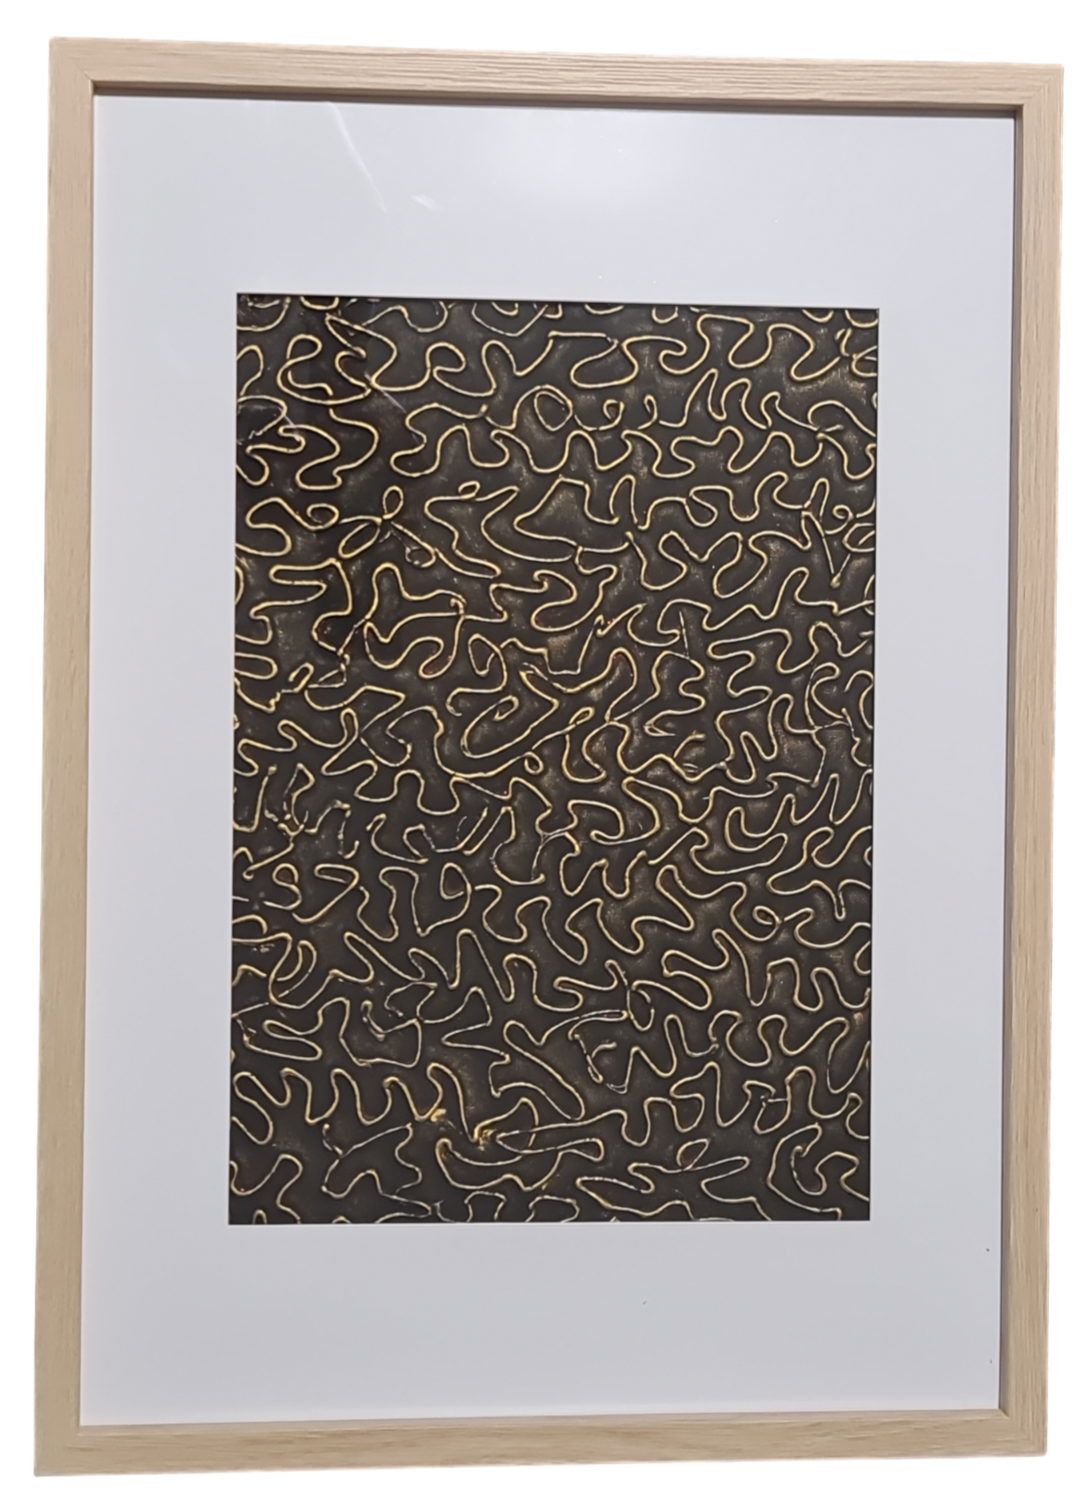 Textured Abstract Art: Black and Gold, Paper Sculpture Design